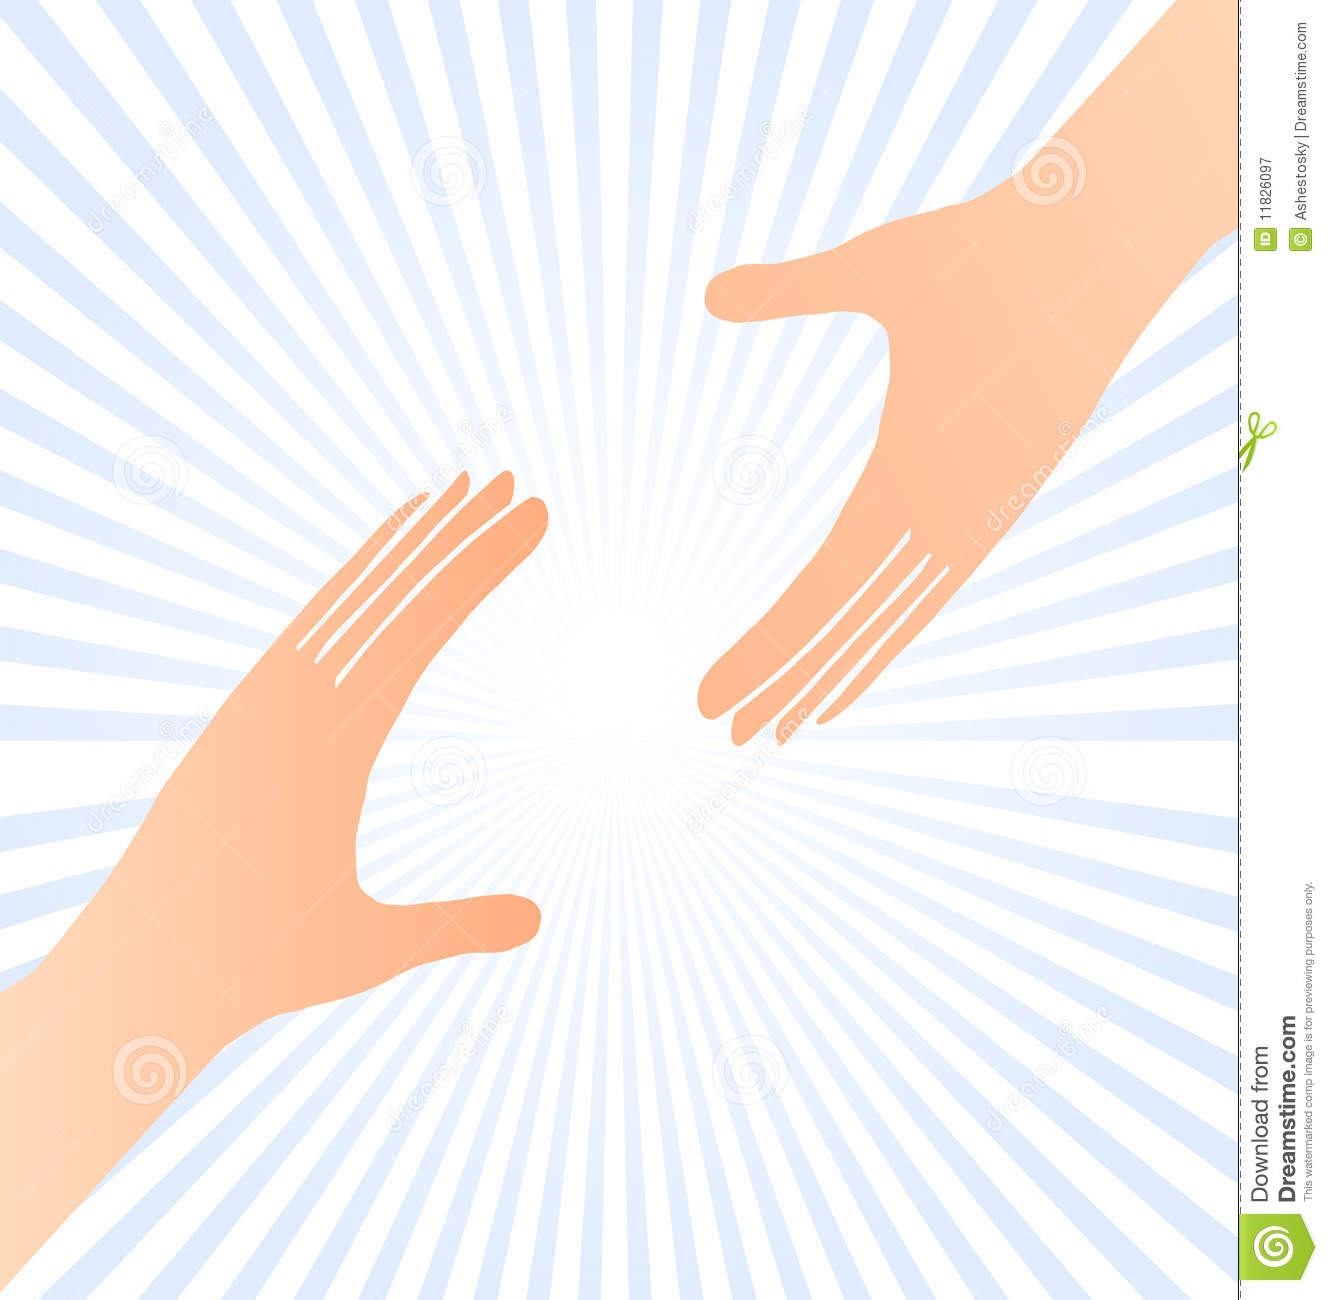 Reaching Hands Help Concept Royalty Free Stock Photography   Image